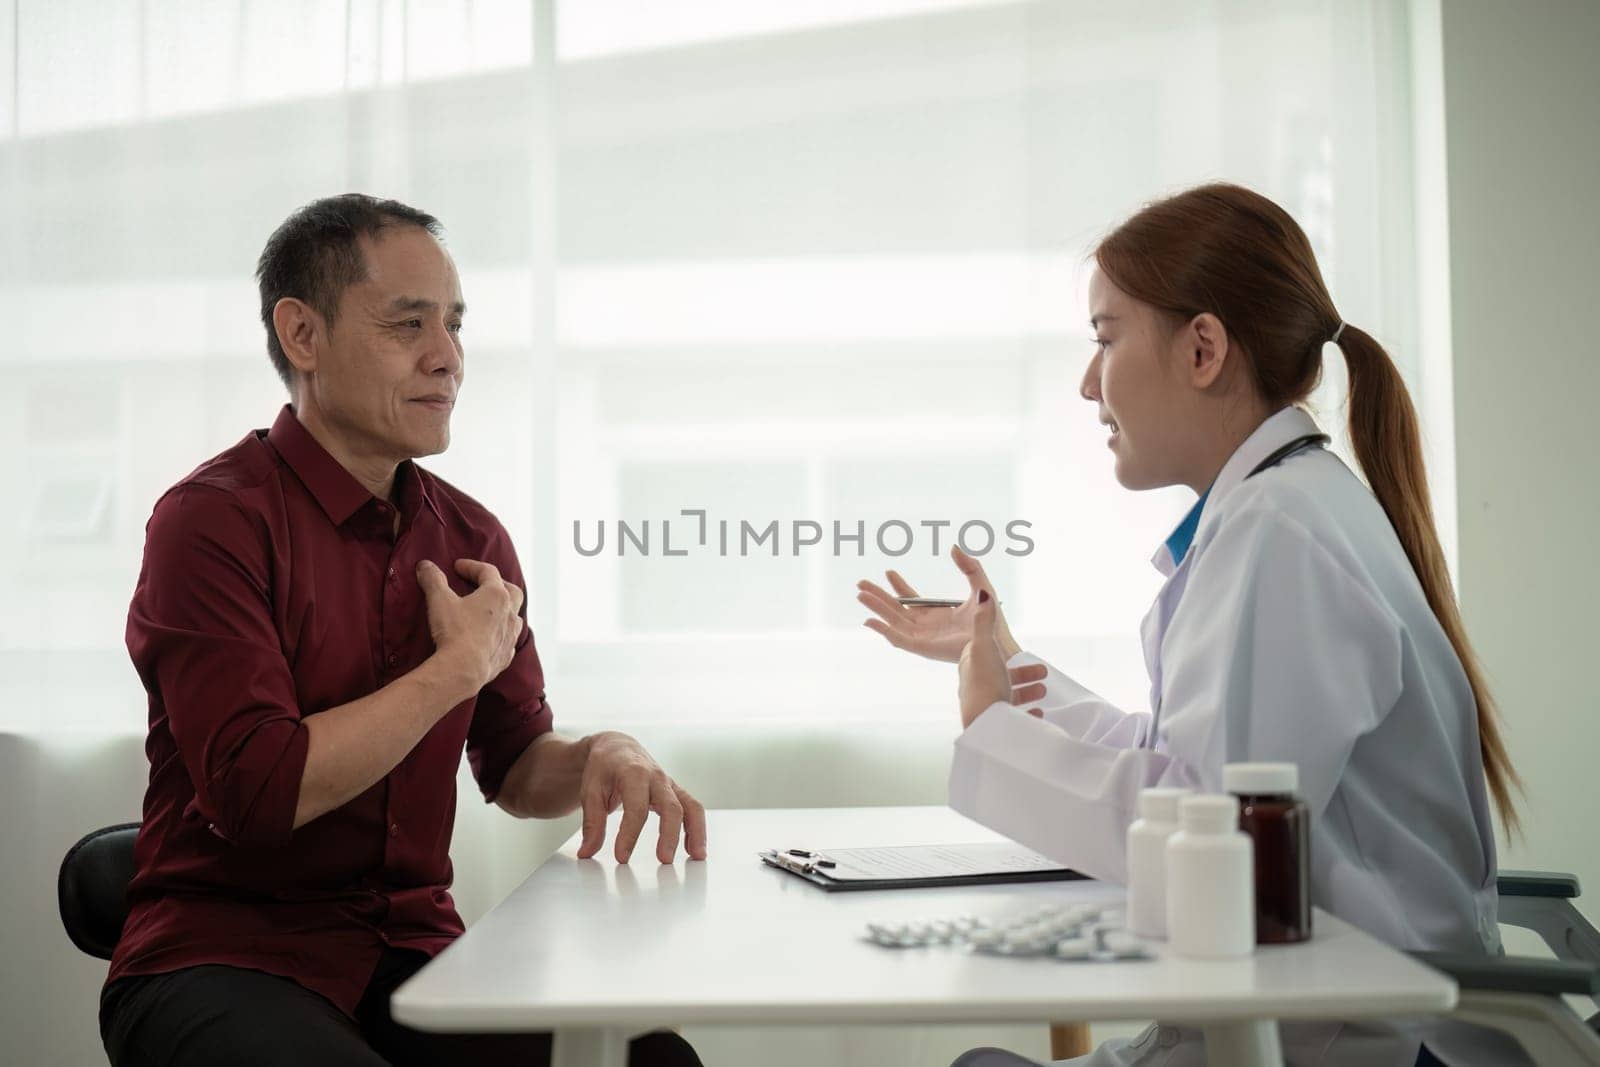 Doctor young woman white coat giving medical consultation to male elderly mature patient, discussing healthcare treatment or health test results at hospital by nateemee